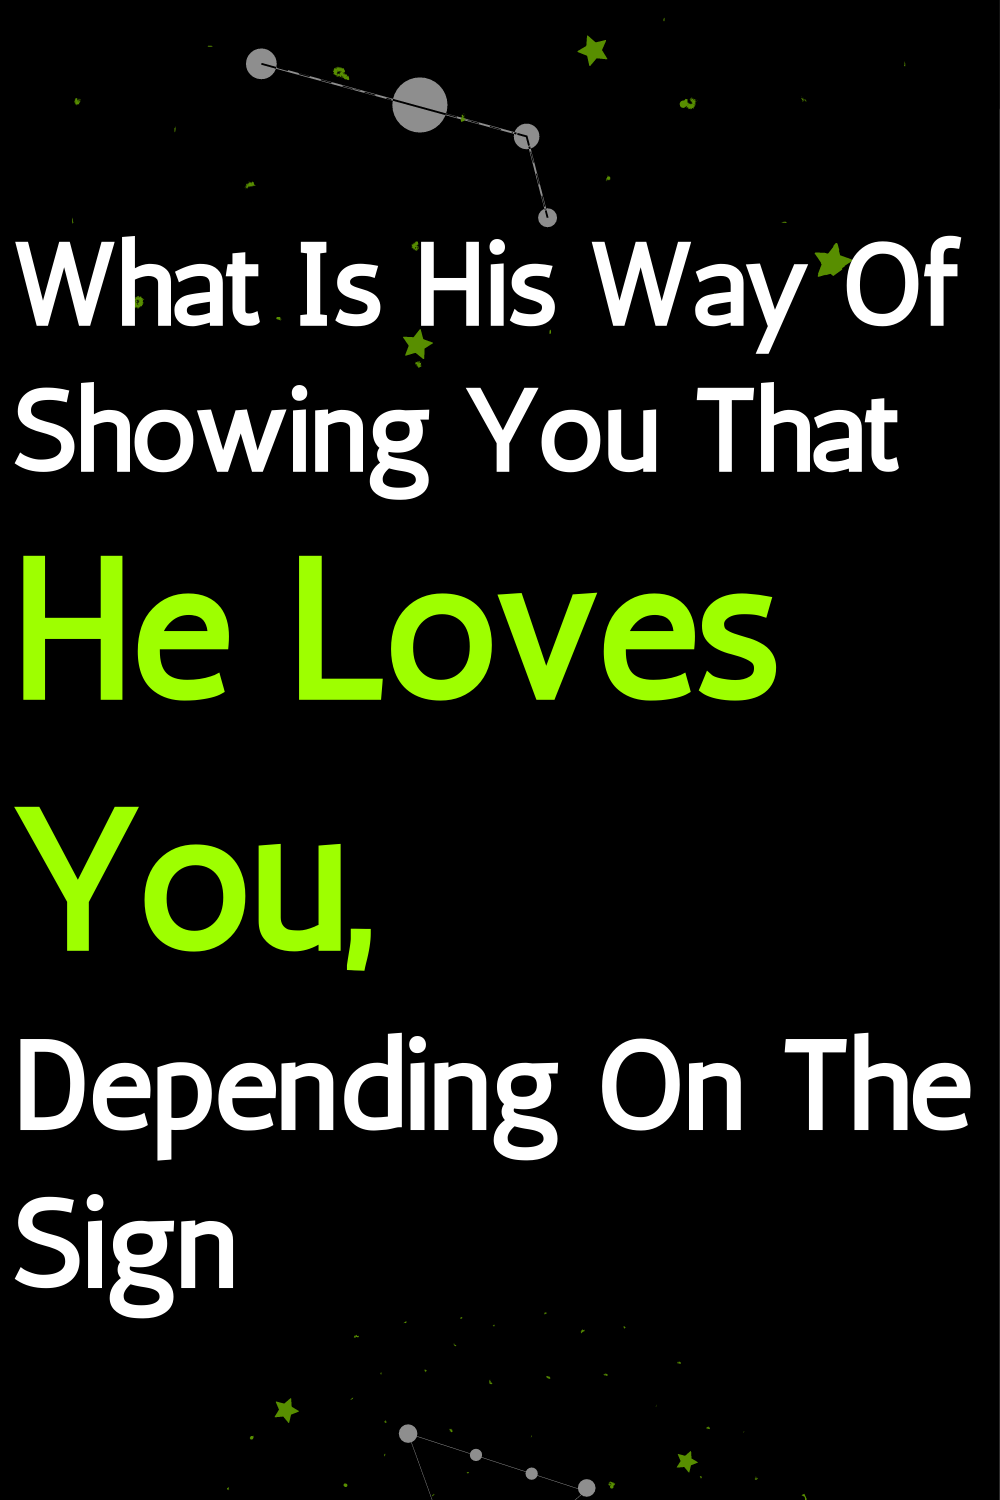 What Is His Way Of Showing You That He Loves You, Depending On The Sign